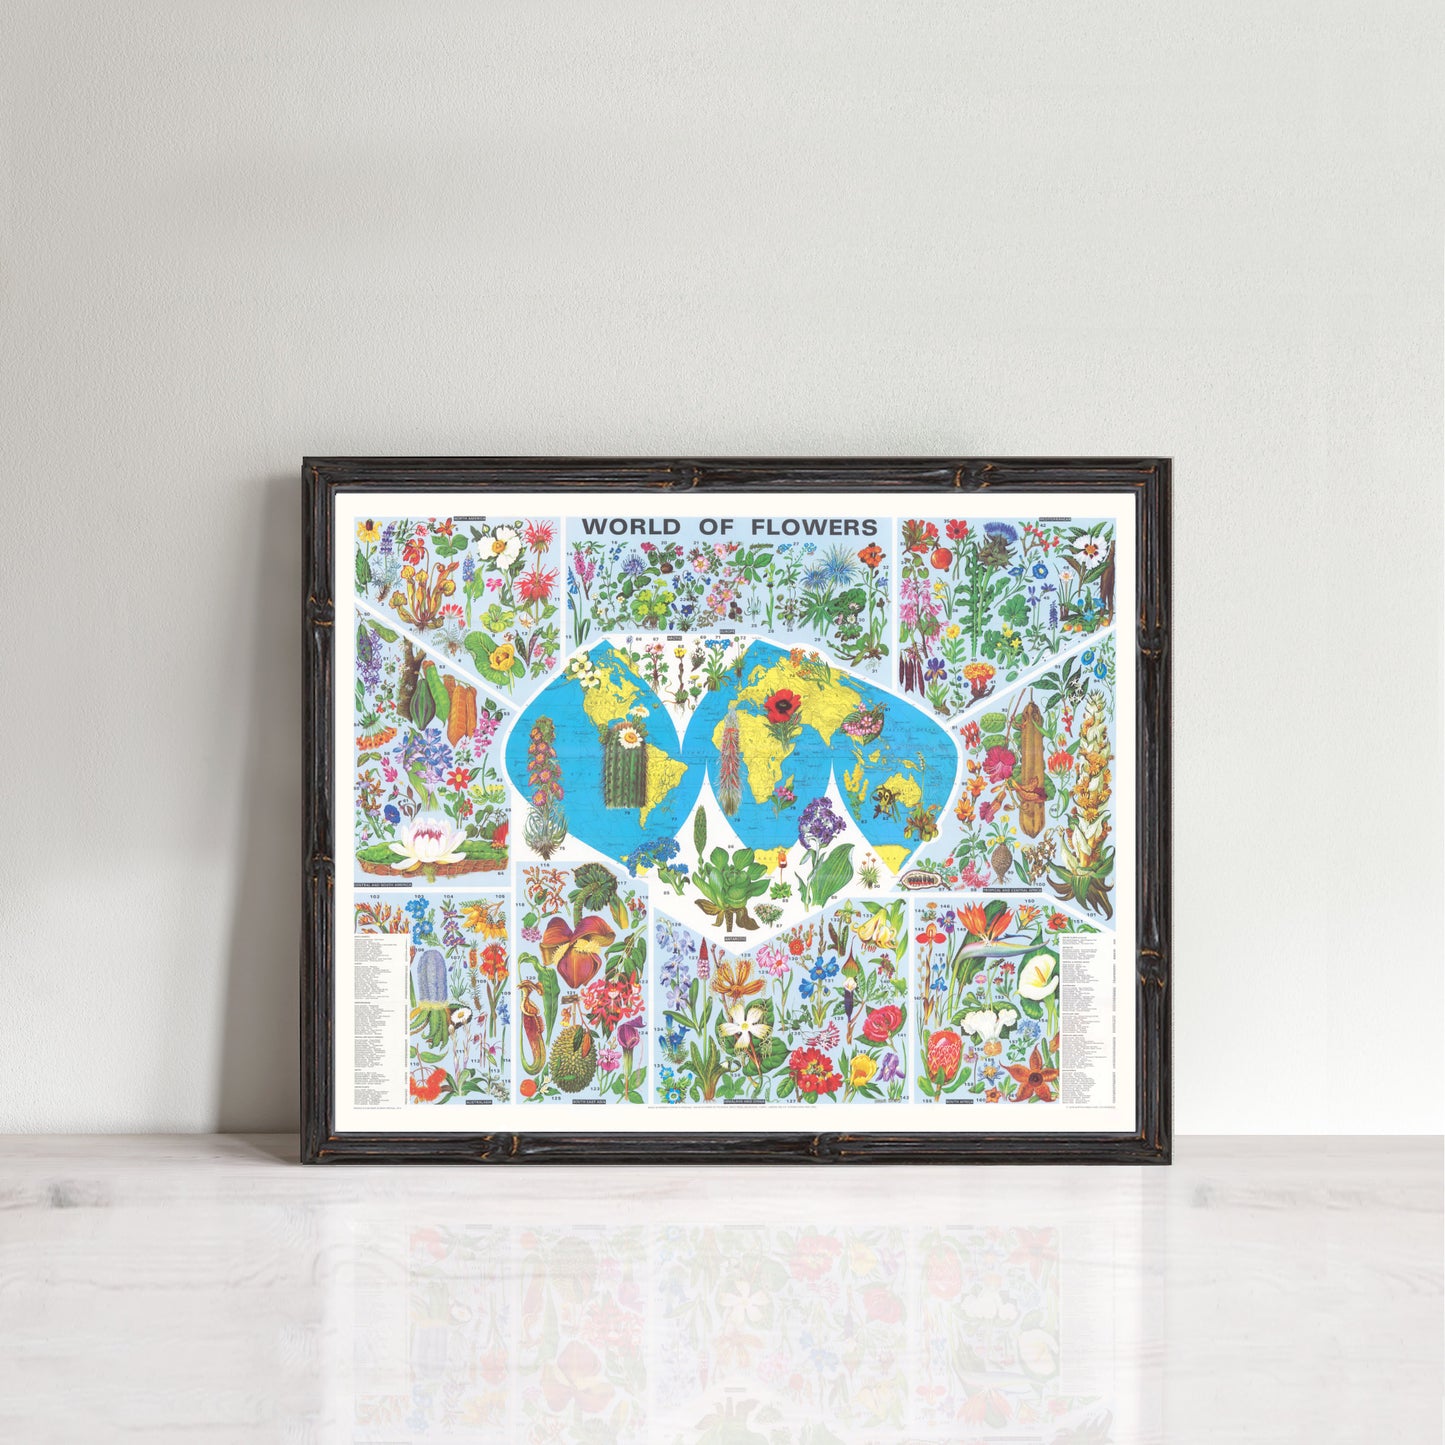 colourful vintage world map with colour illustrations and listing of flower types by continent.